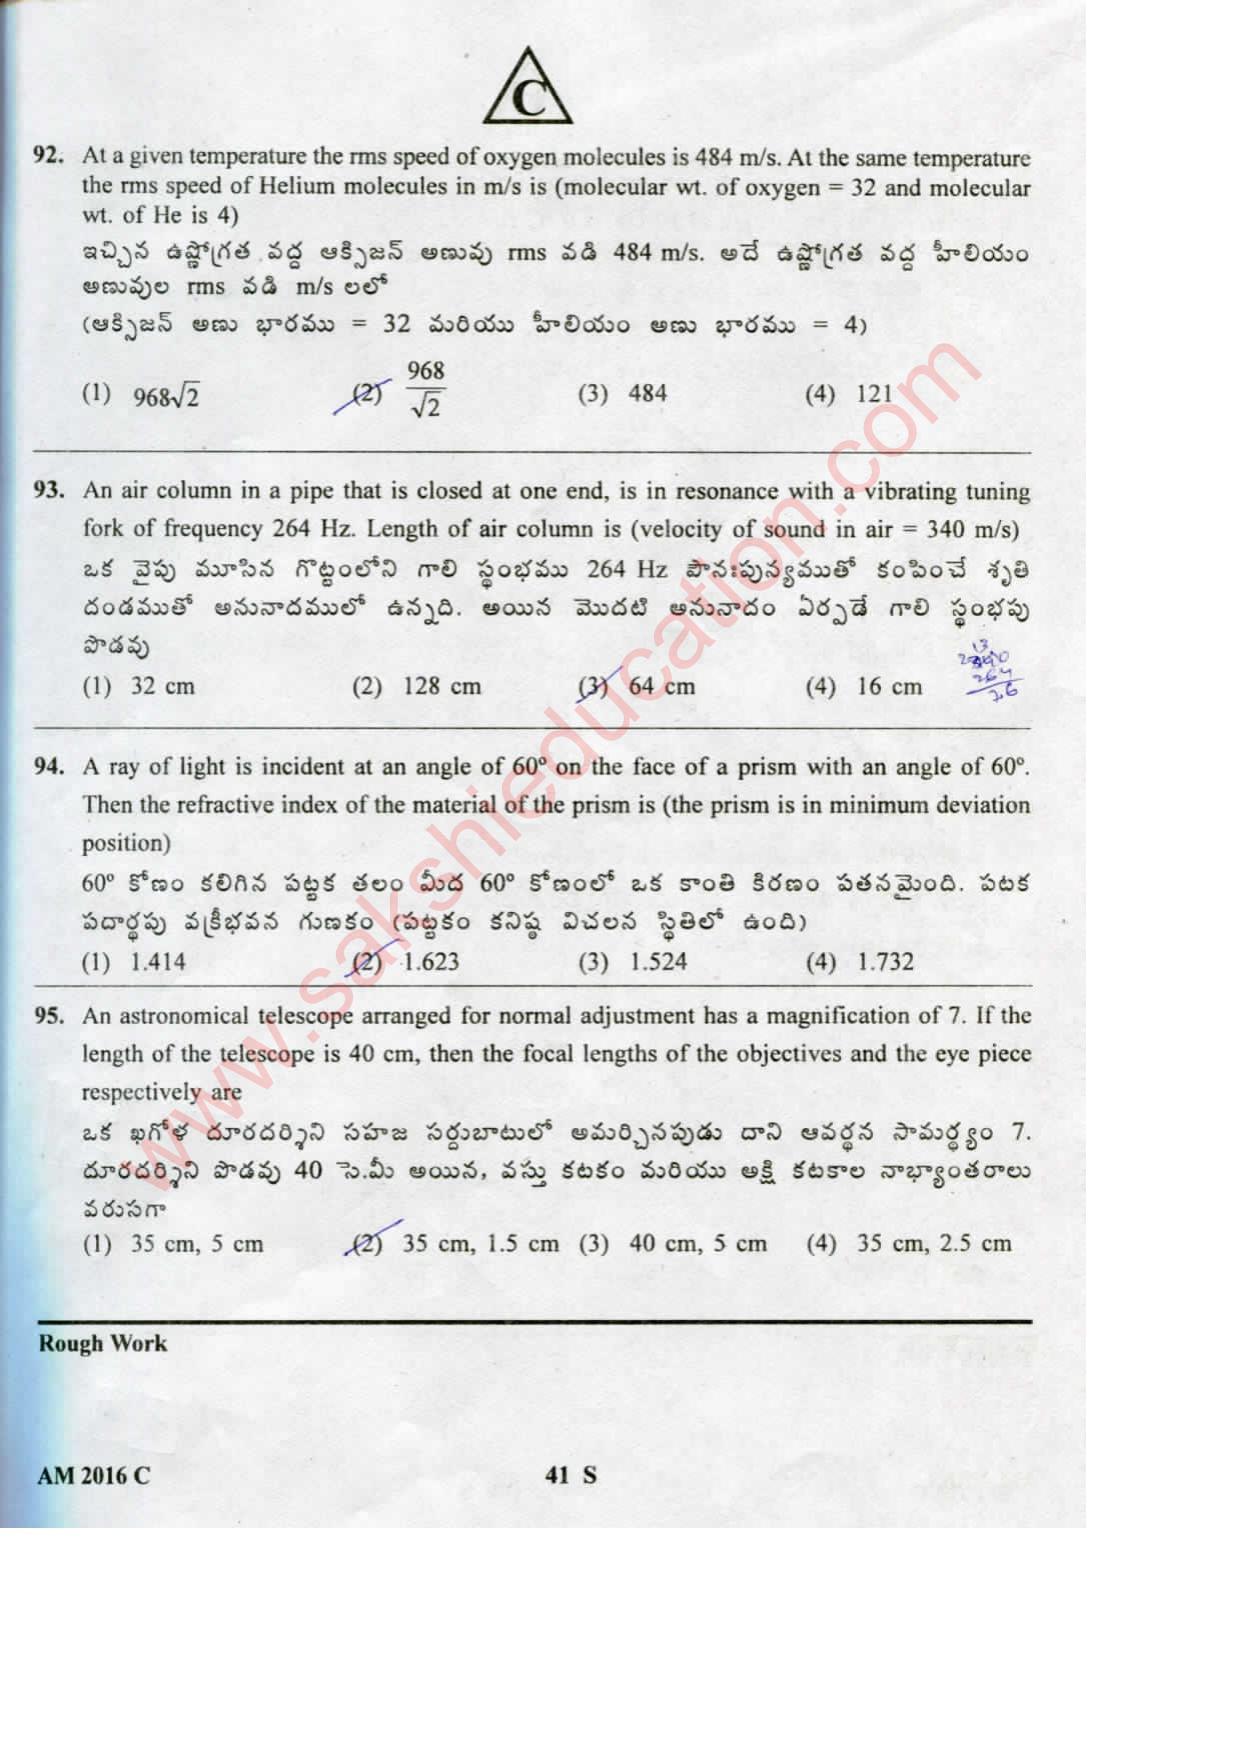 TS EAMCET 2016 Medical Question Paper with Key (Held on 15 May 2016) - Page 41